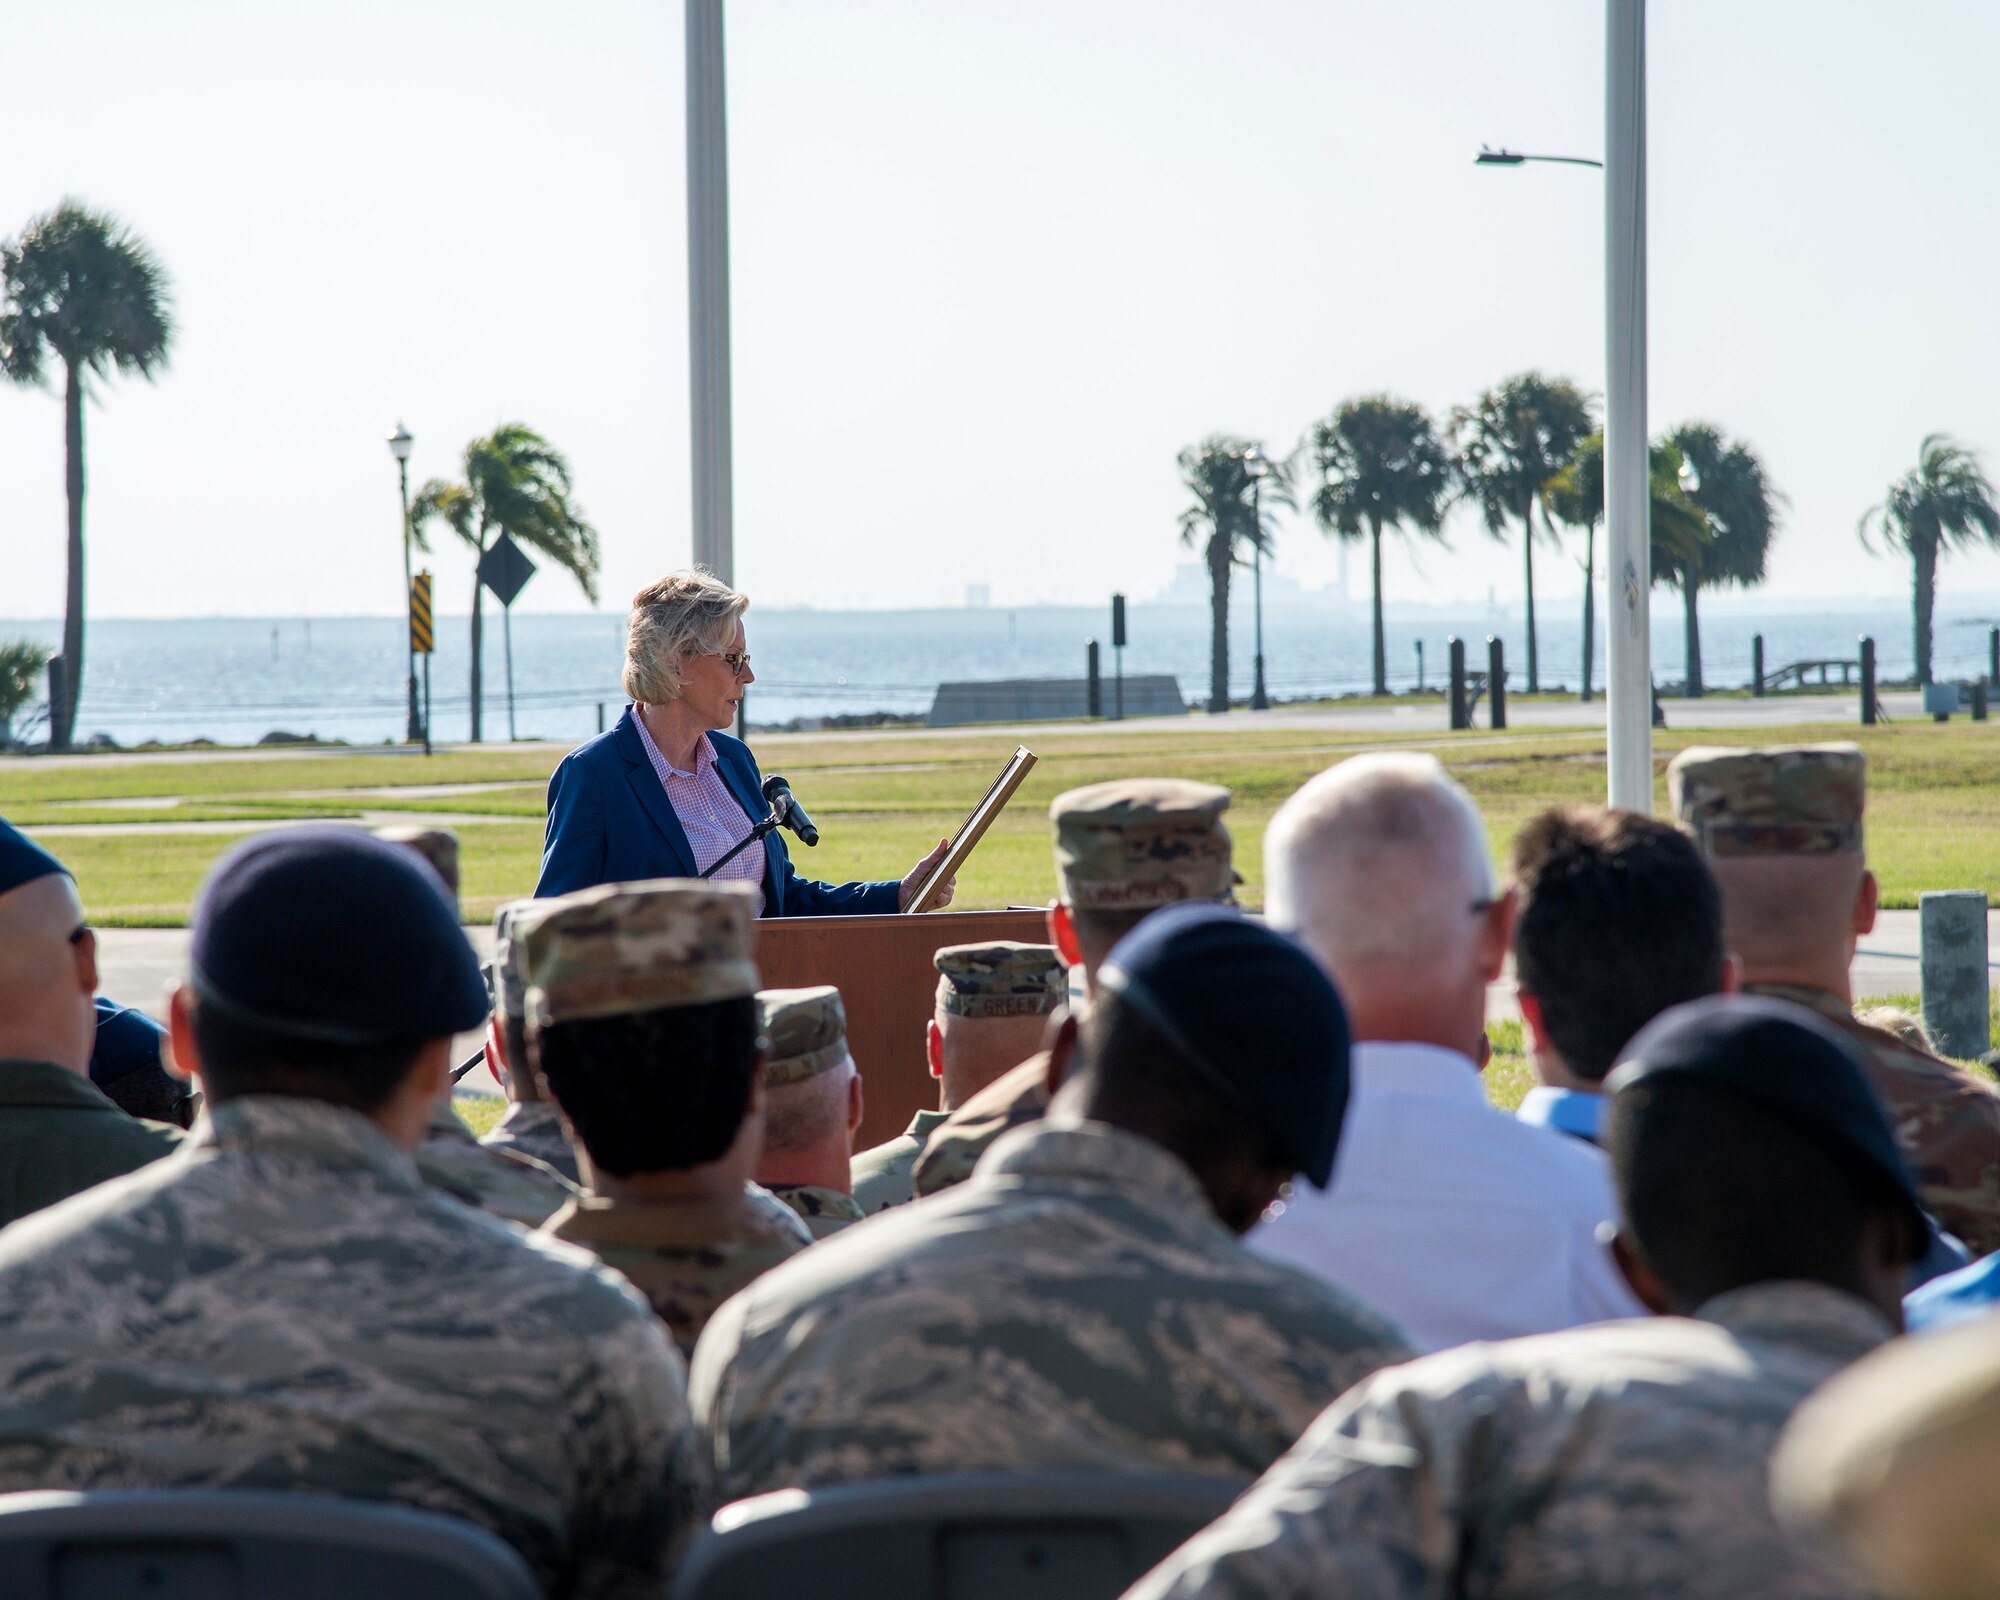 City of Tampa Mayor, Jane Castor, gives a proclamation of recognizing Sept. 30th as “6th Air Refueling Wing Day” at the 6th ARW redesignation ceremony at MacDill Air Force Base, Fla., Sept. 30, 2019.